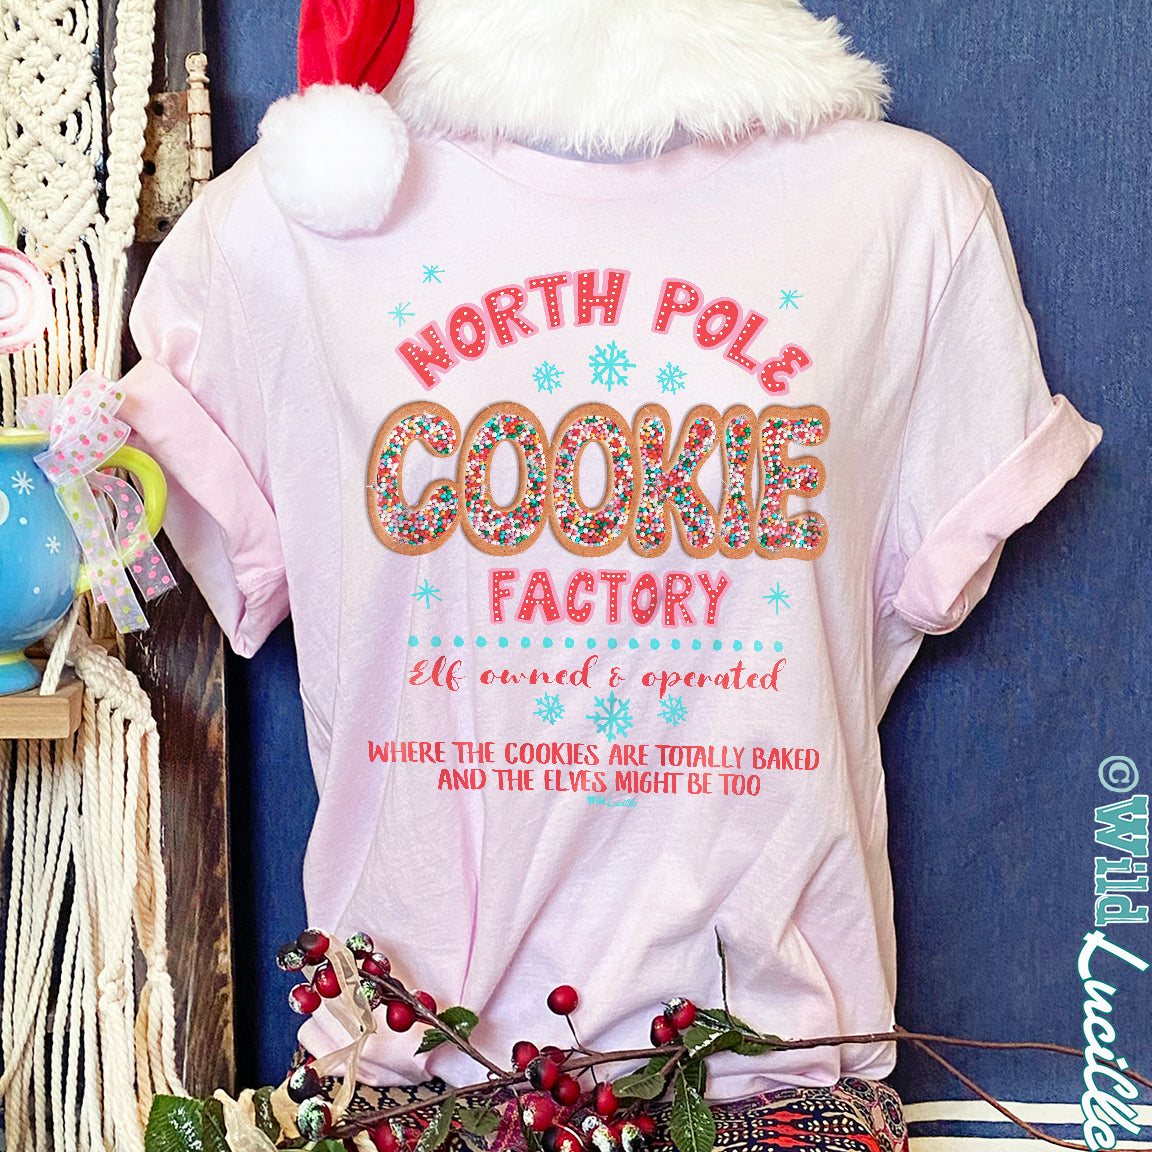 Christmas and holiday graphic tees wholesale